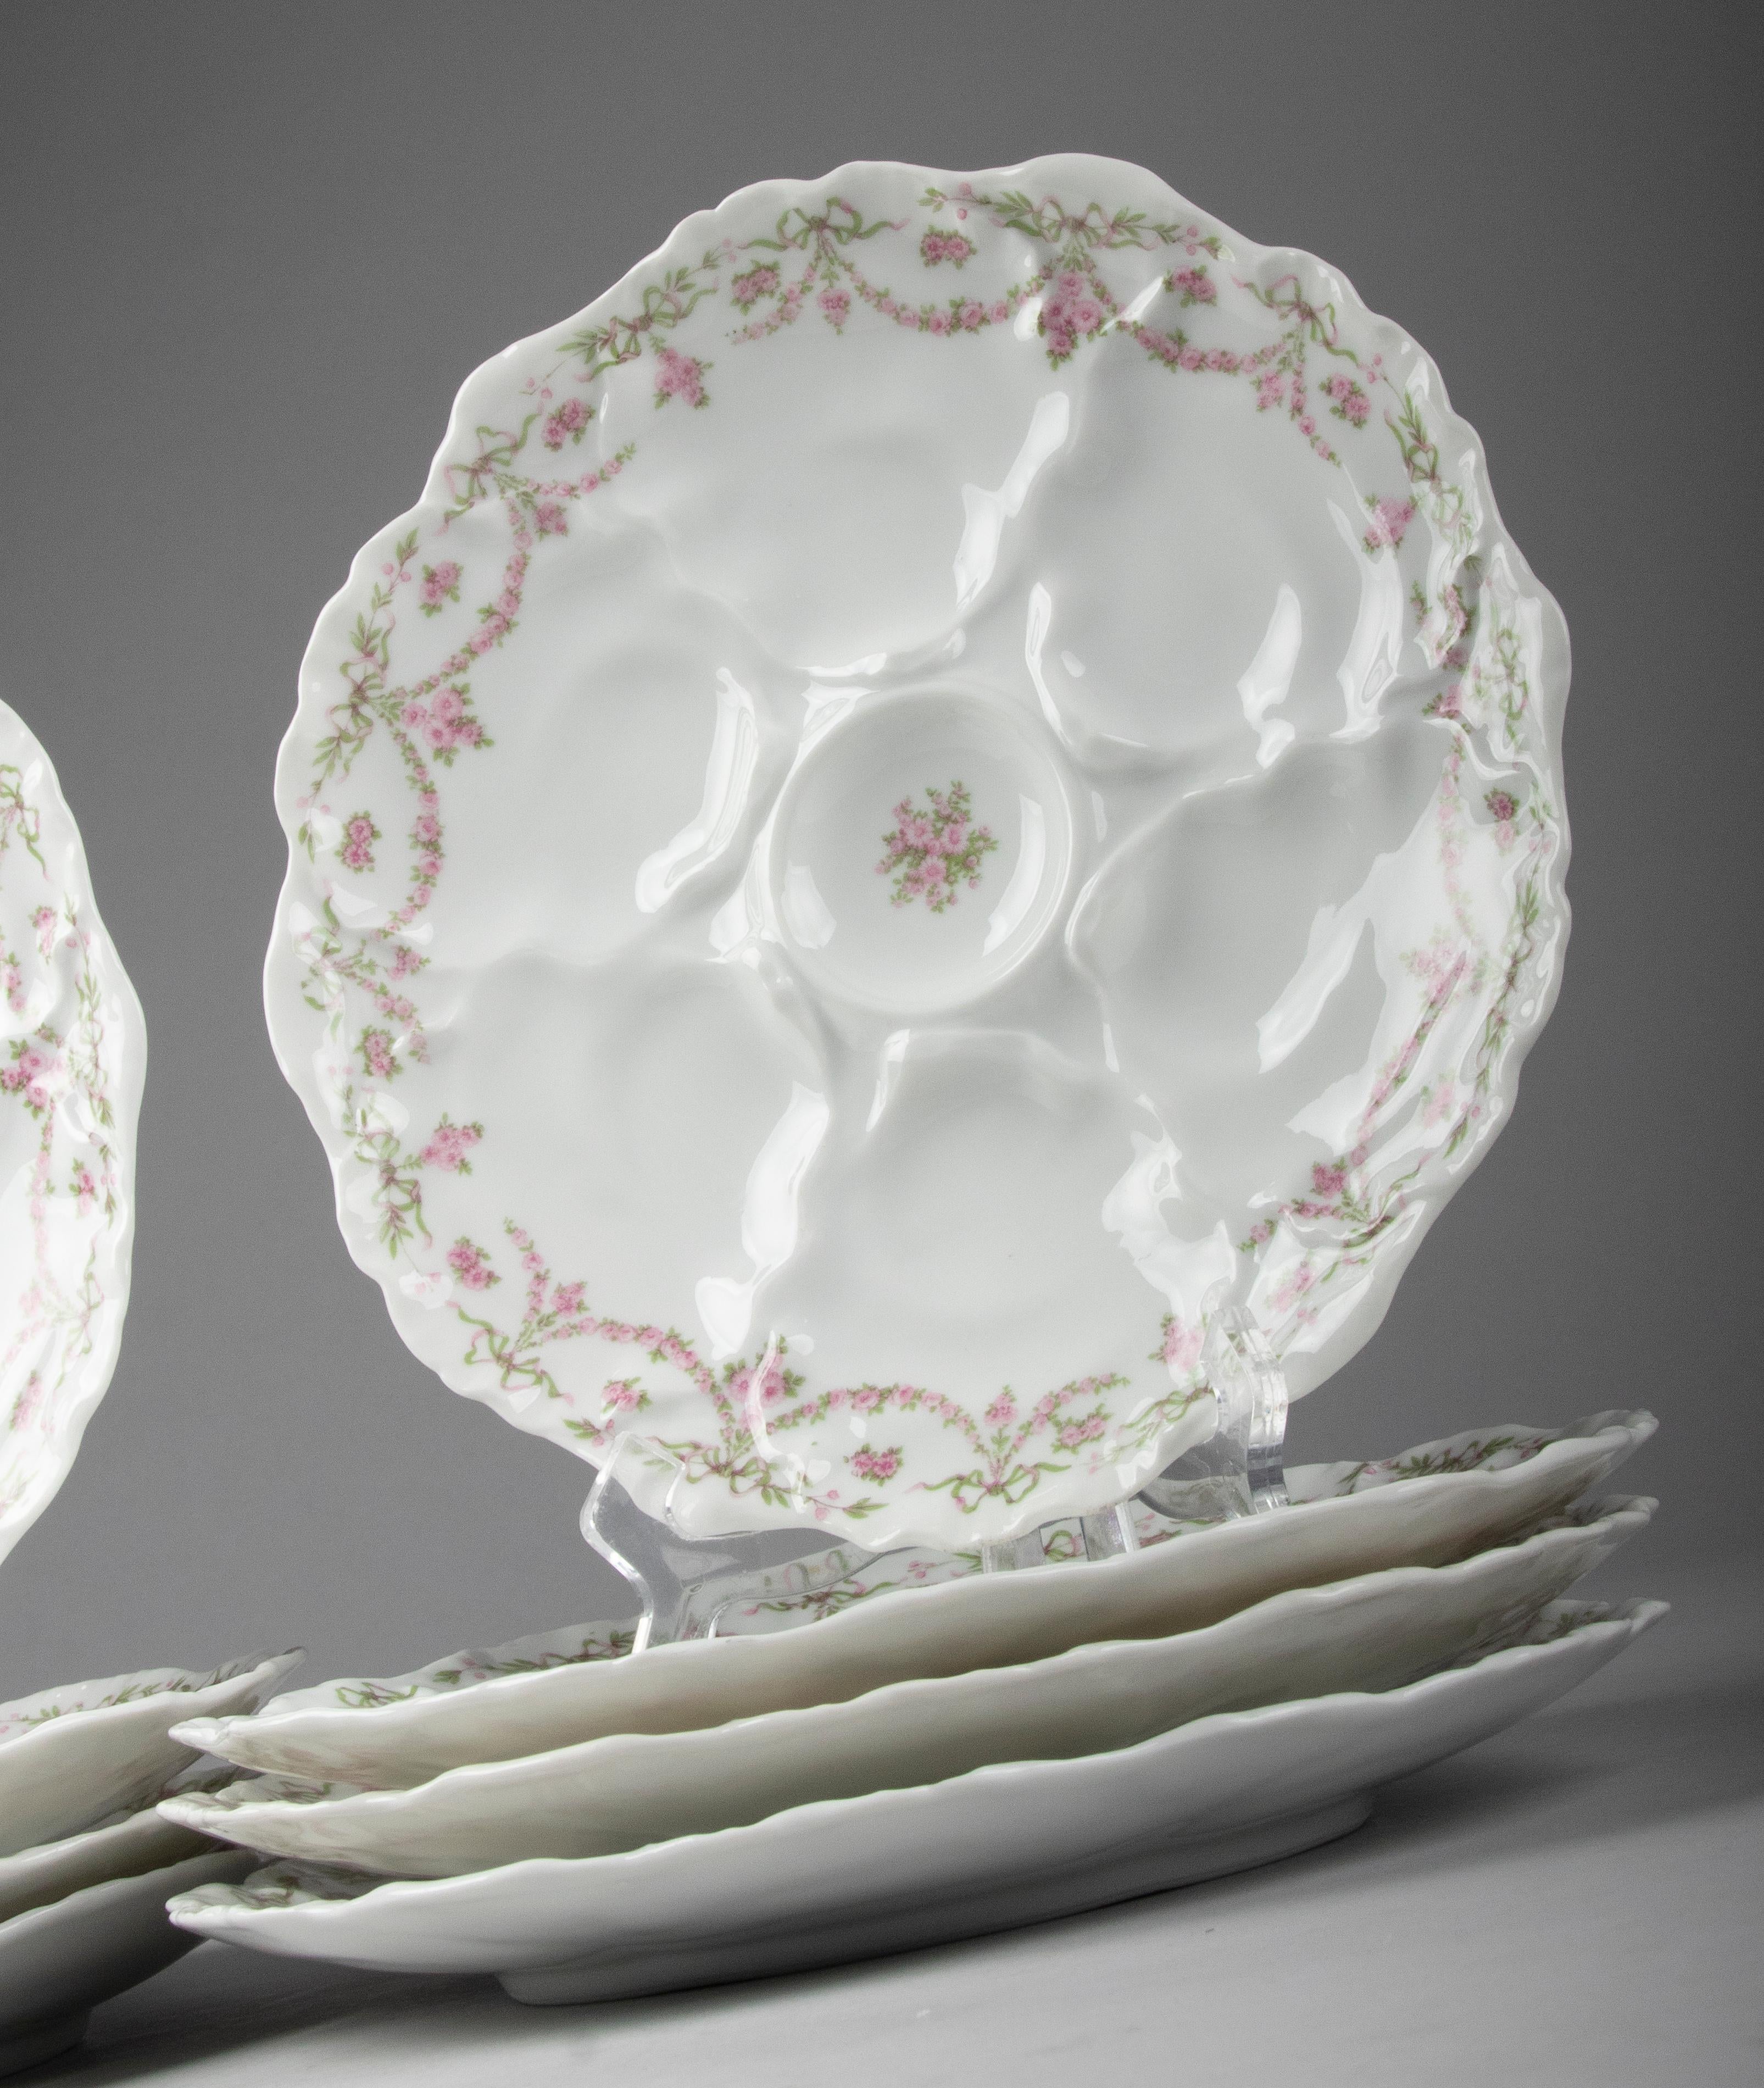 Early 20th Century Set of 8 Porcelain Oyster Plates by Limoges